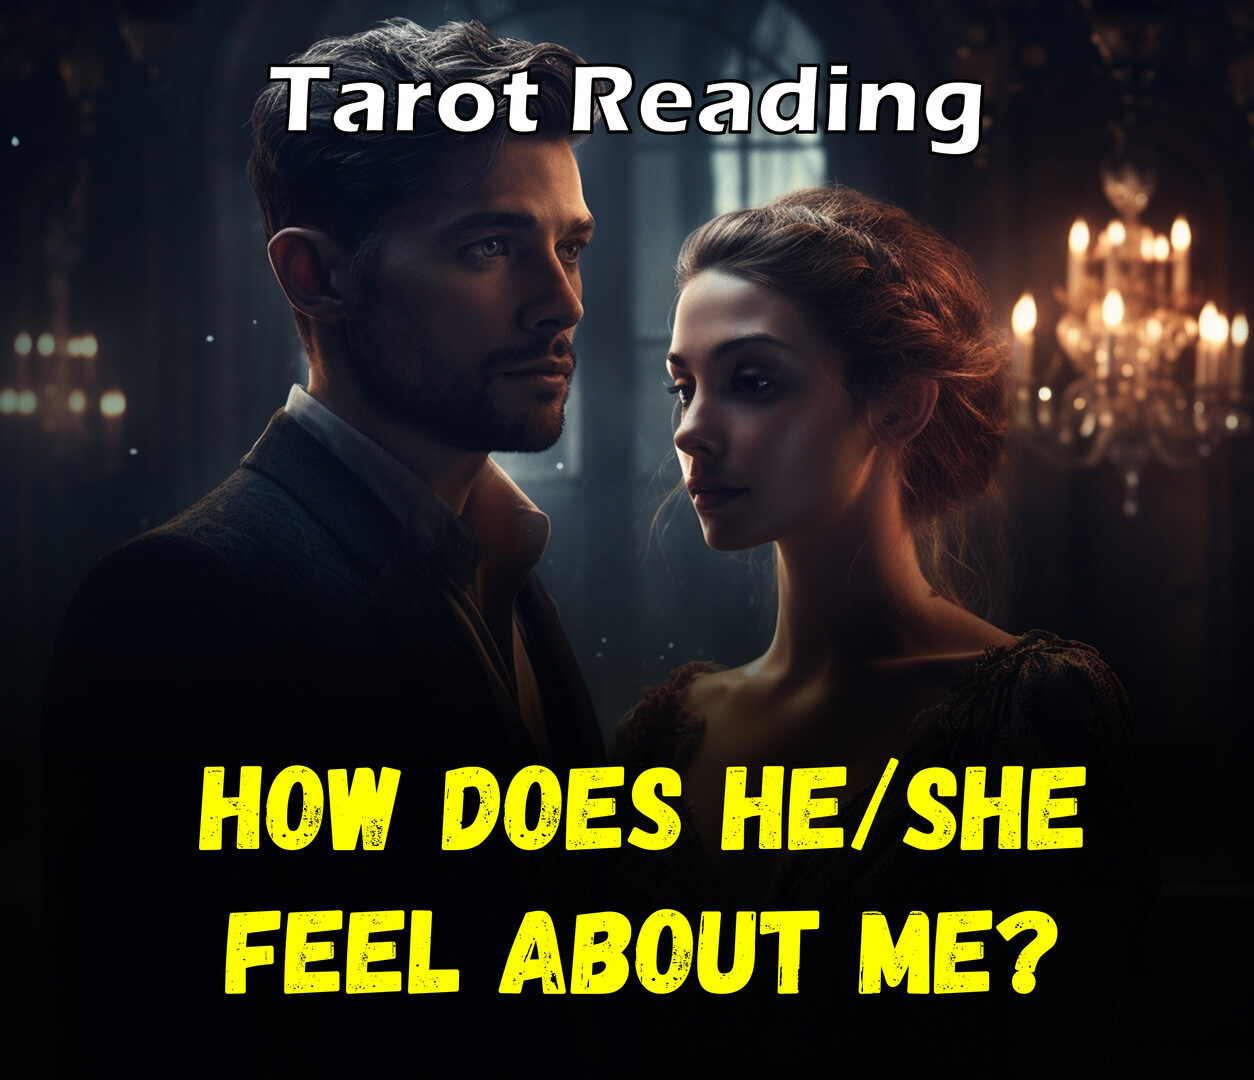 Psychic Reading,Love Reading,Same Day Reading,Is he the one,Message From Ex,How does he feel,How does she feel,His feelings for me,Her feelings for me,Is She The One,From Your Person,Thoughts Revealed,Telepathy Psychic